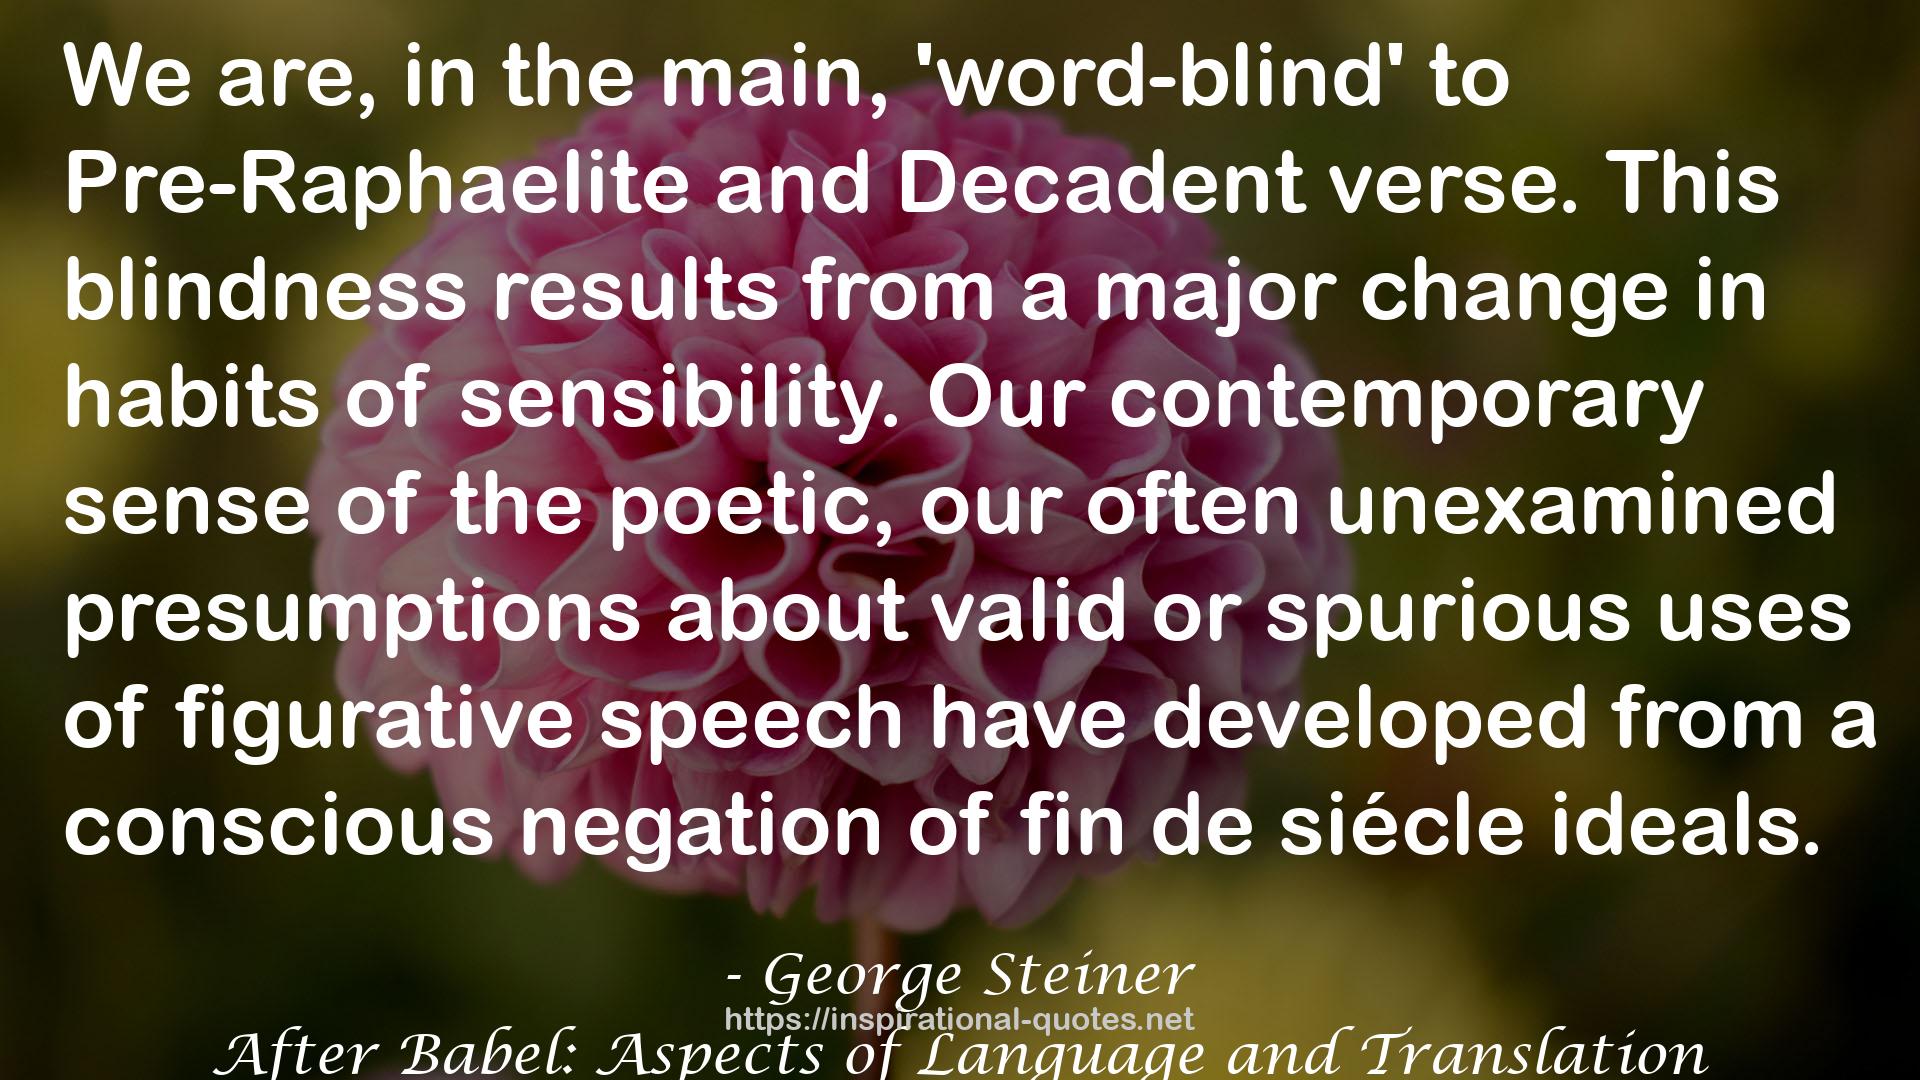 After Babel: Aspects of Language and Translation QUOTES